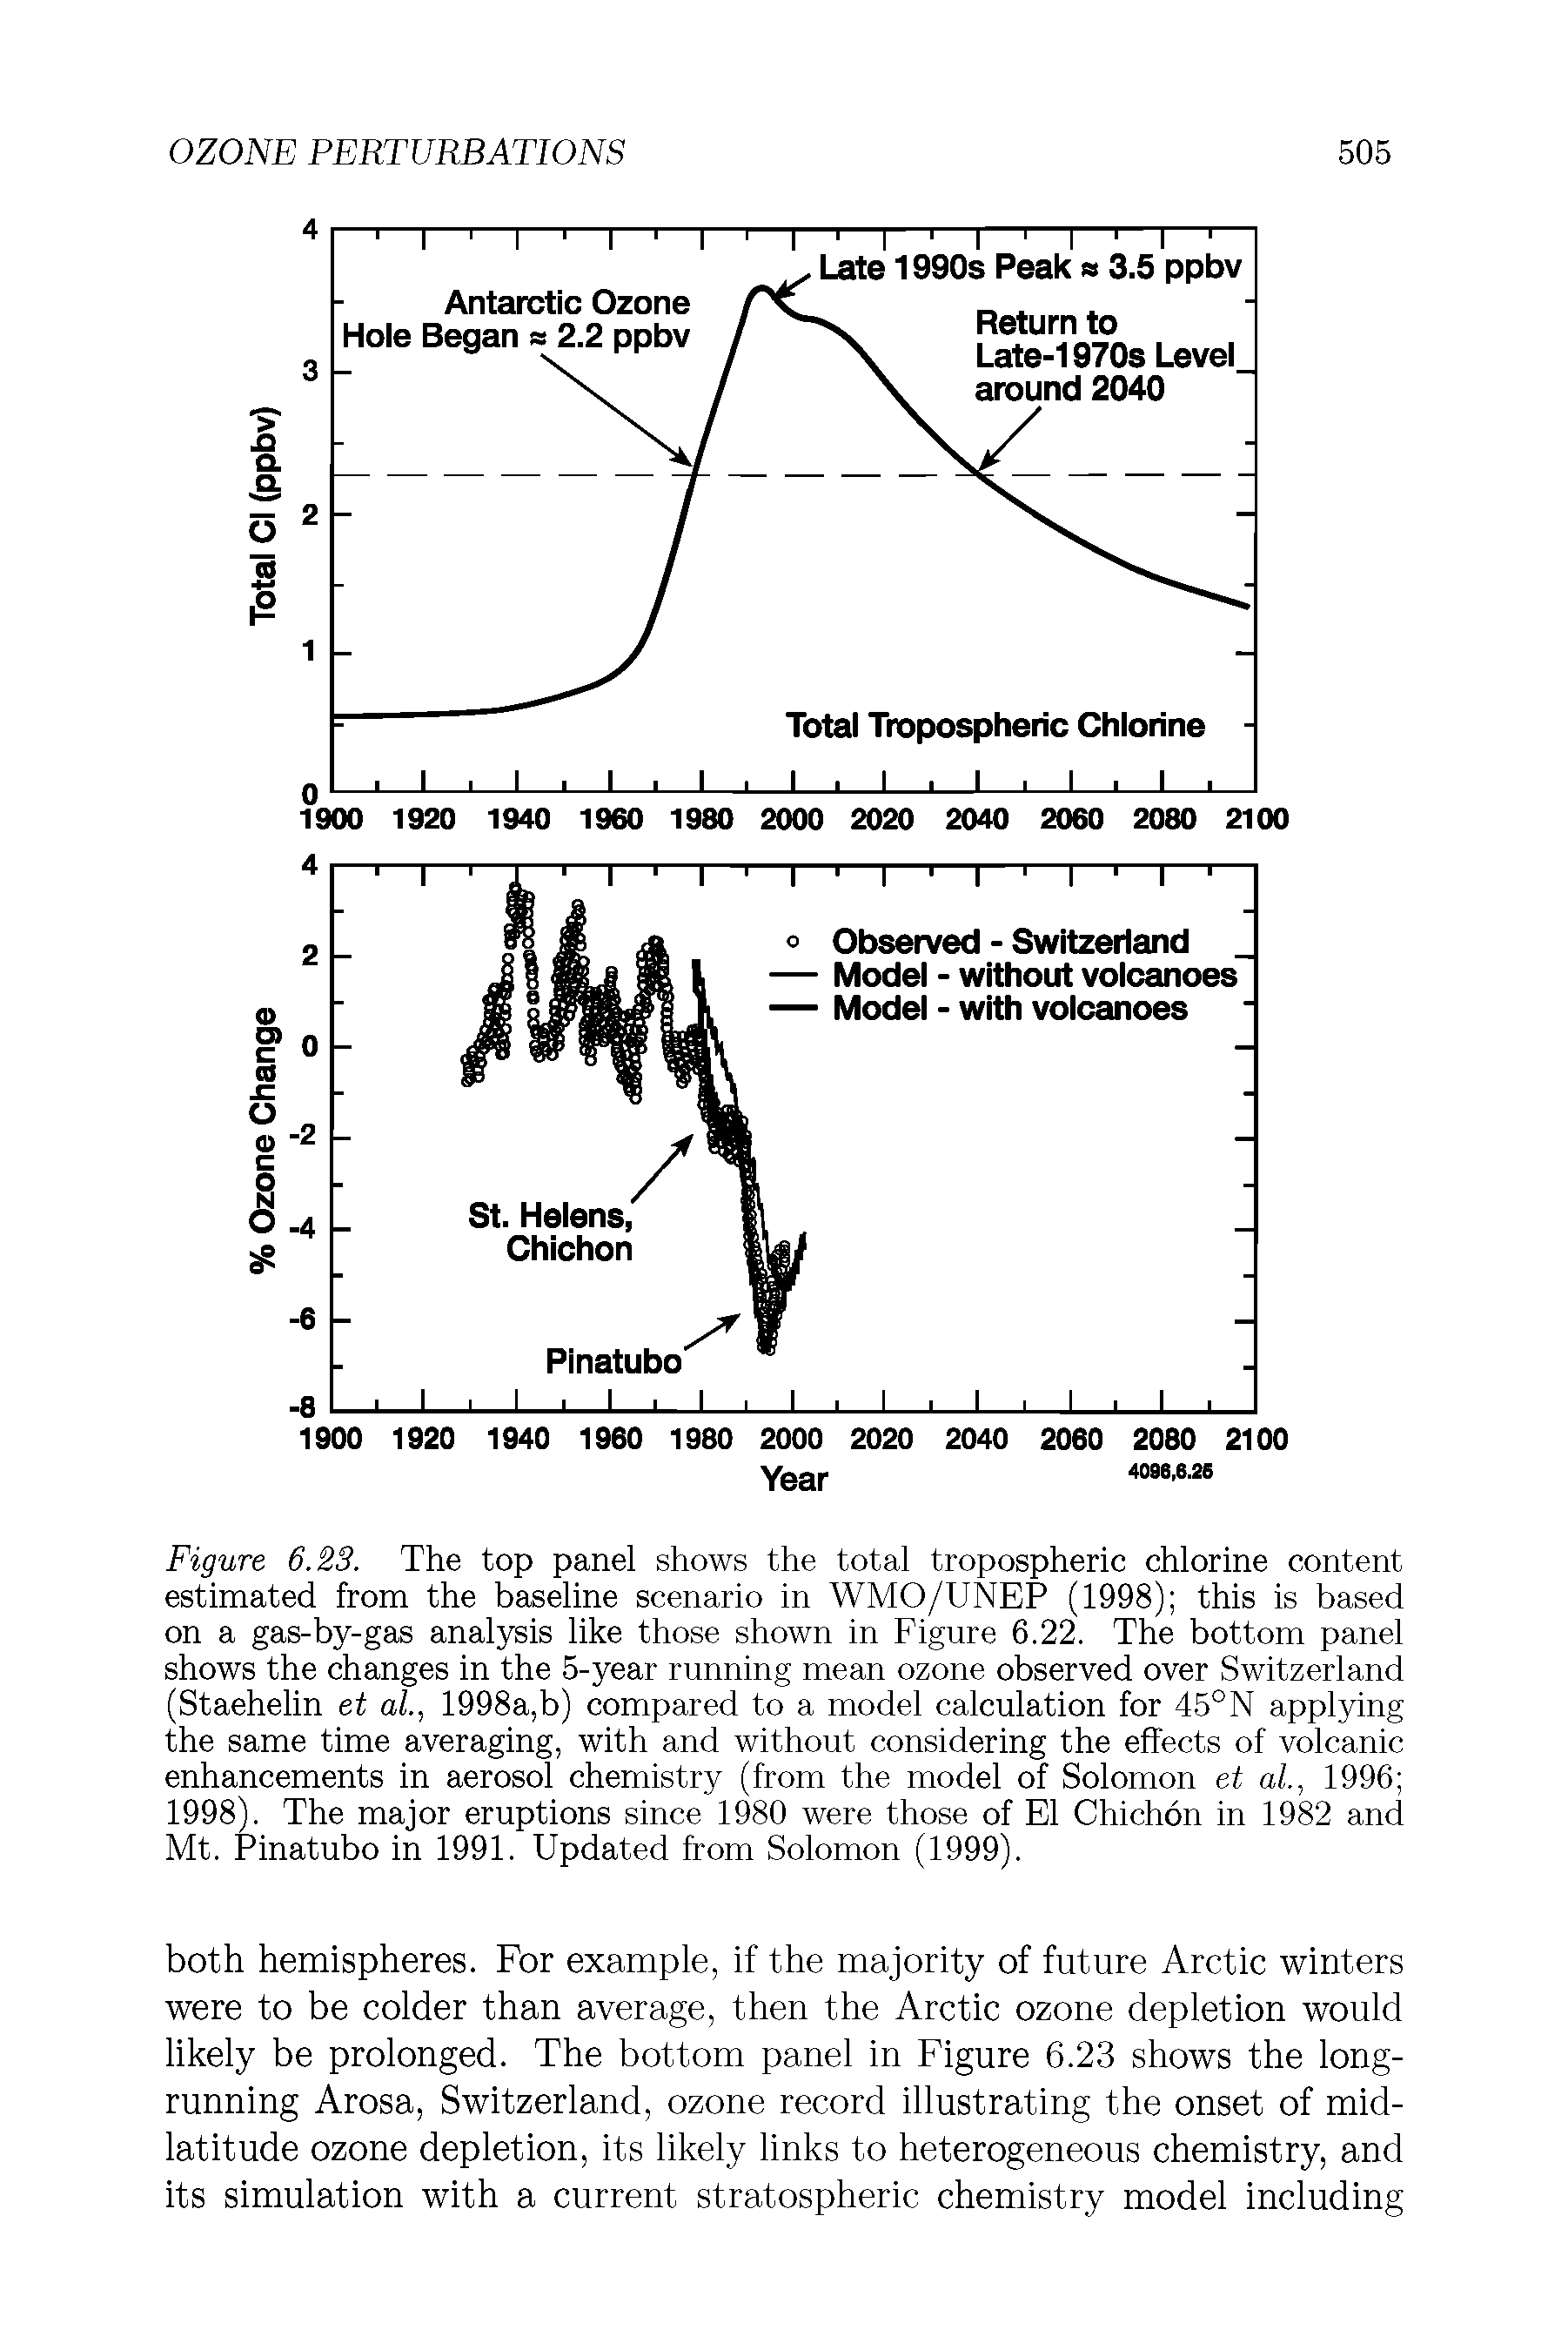 Figure 6.23. The top panel shows the total tropospheric chlorine content estimated from the baseline scenario in WMO/UNEP (1998) this is based on a gas-by-gas analysis like those shown in Figure 6.22. The bottom panel shows the changes in the 5-year running mean ozone observed over Switzerland (Staehelin et al., 1998a,b) compared to a model calculation for 45°N applying the same time averaging, with and without considering the effects of volcanic enhancements in aerosol chemistry (from the model of Solomon et al., 1996 1998). The major eruptions since 1980 were those of El Chichon in 1982 and Mt. Pinatubo in 1991. Updated from Solomon (1999).